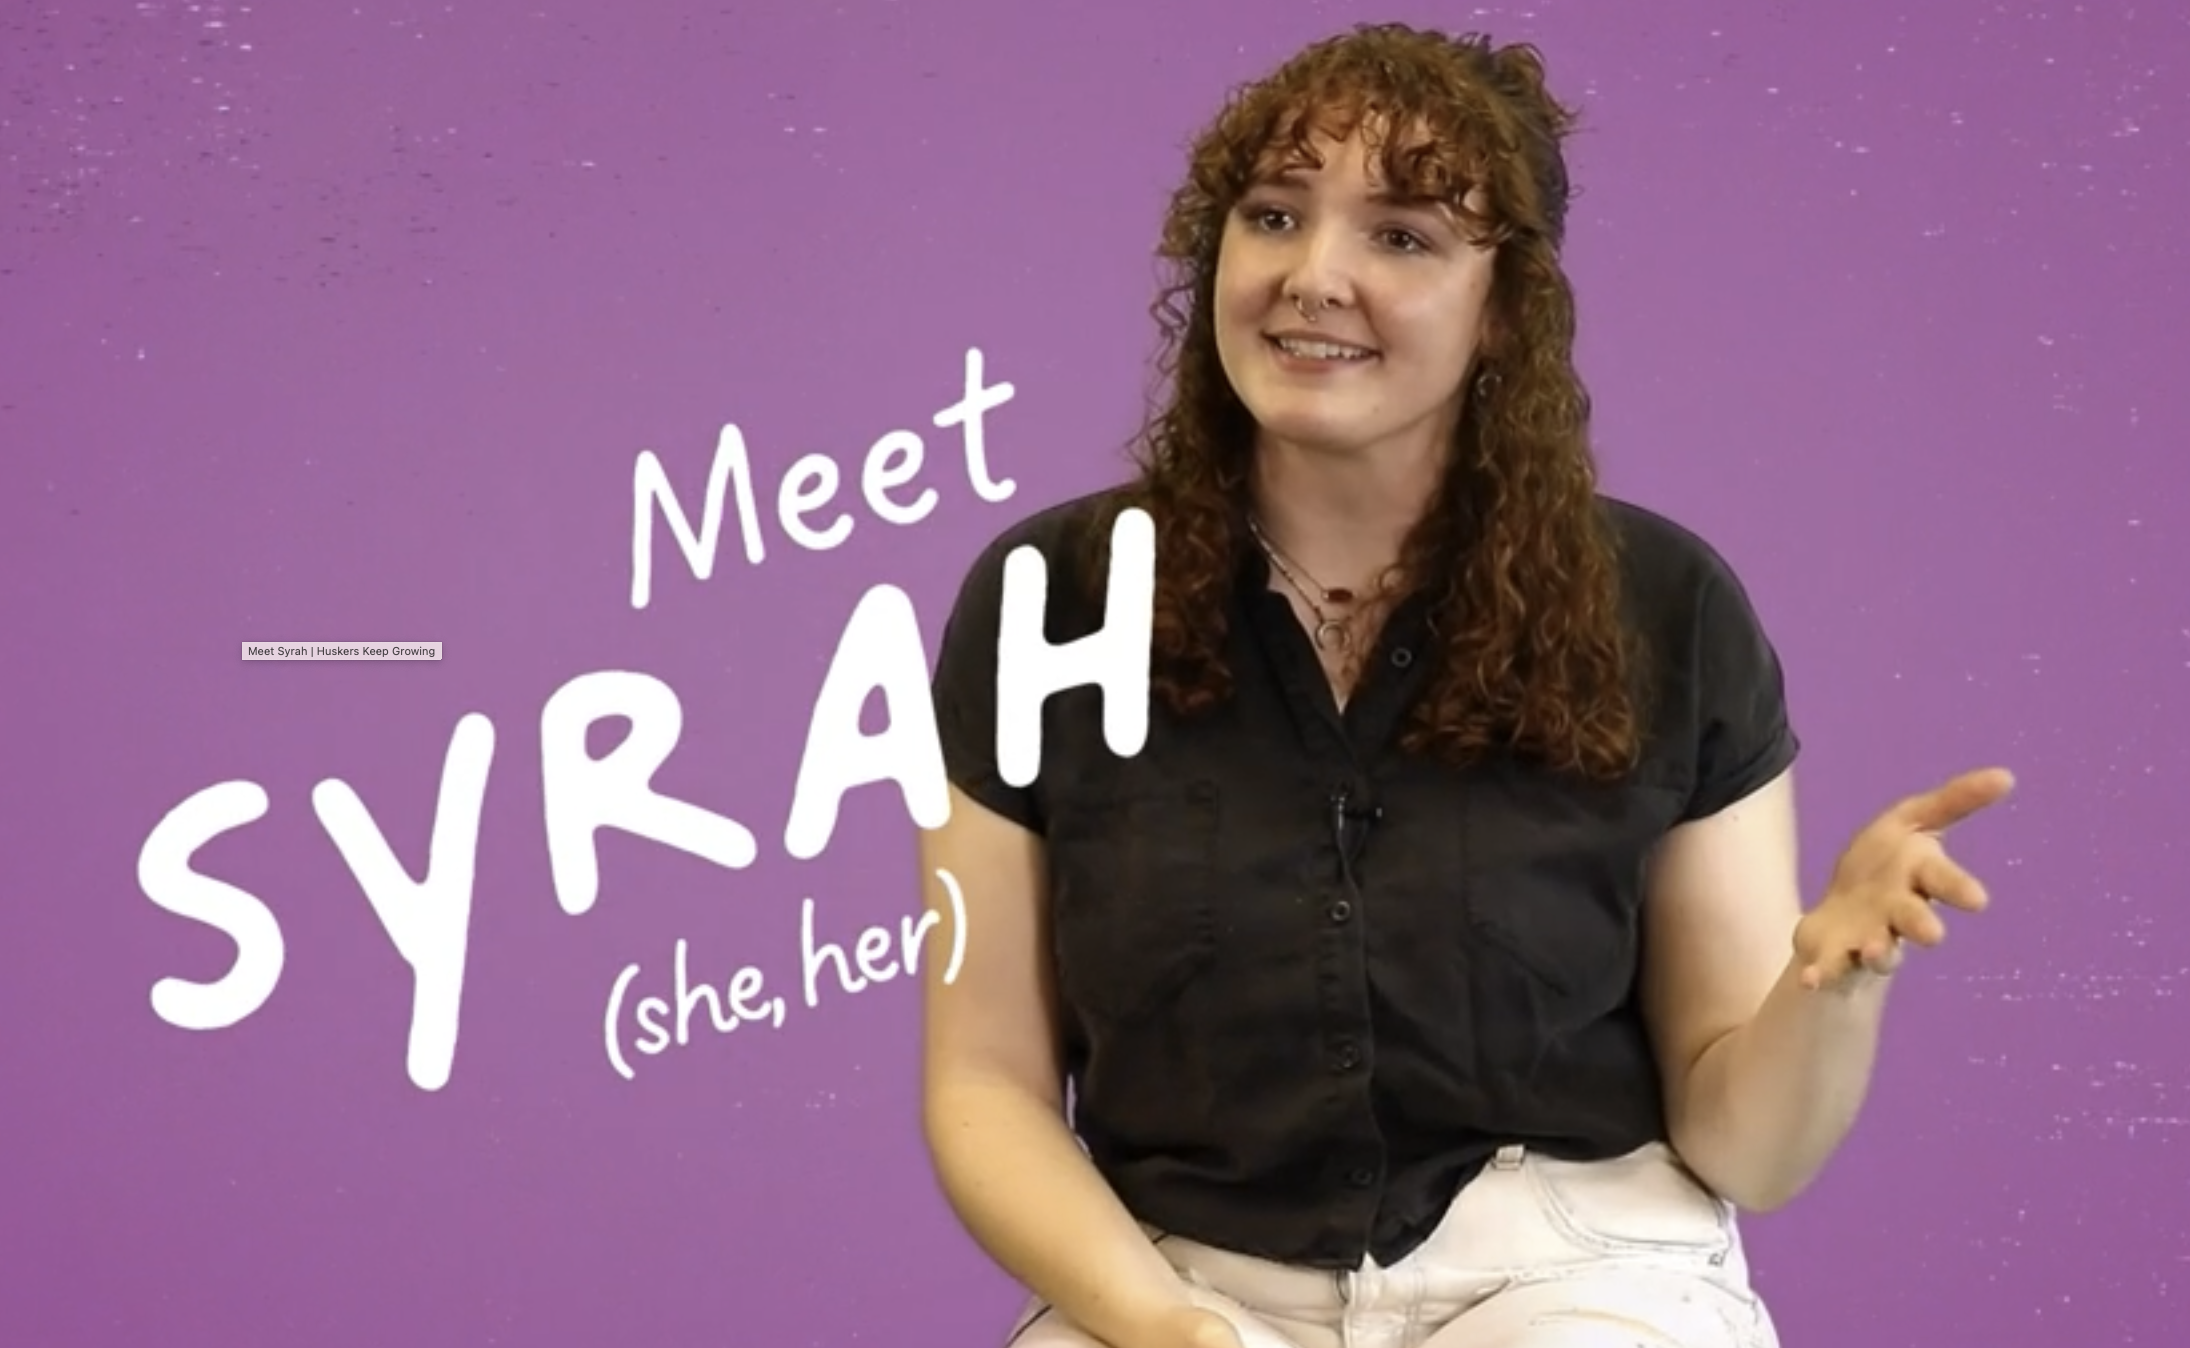 Syrah (she/her) is majoring in mathematics.